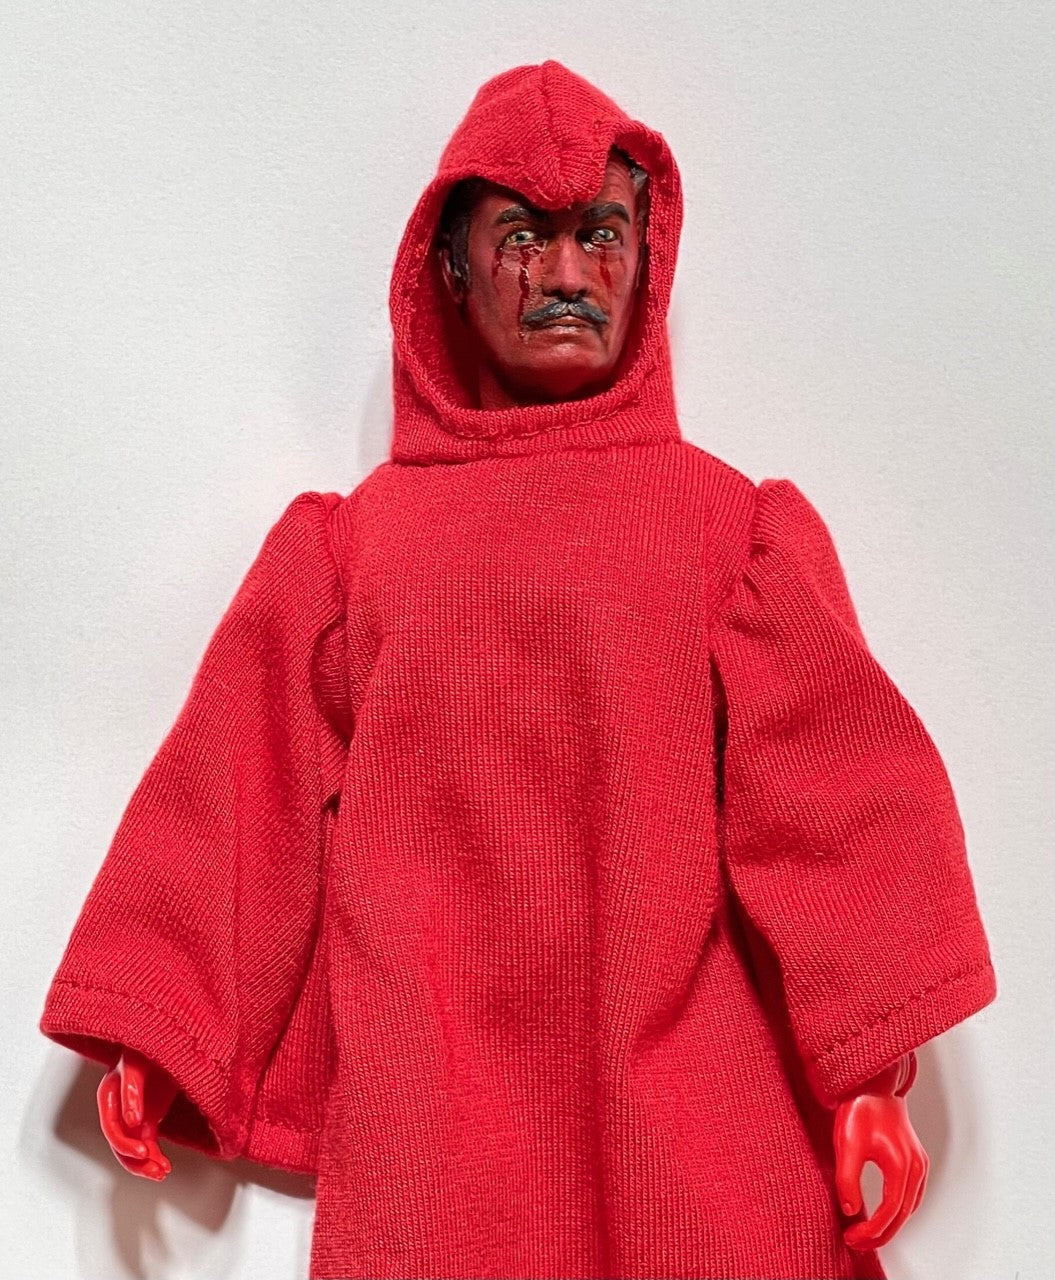 Brentz Dolz Vincent Price - The Masque of the Red Death 8" Action Figure